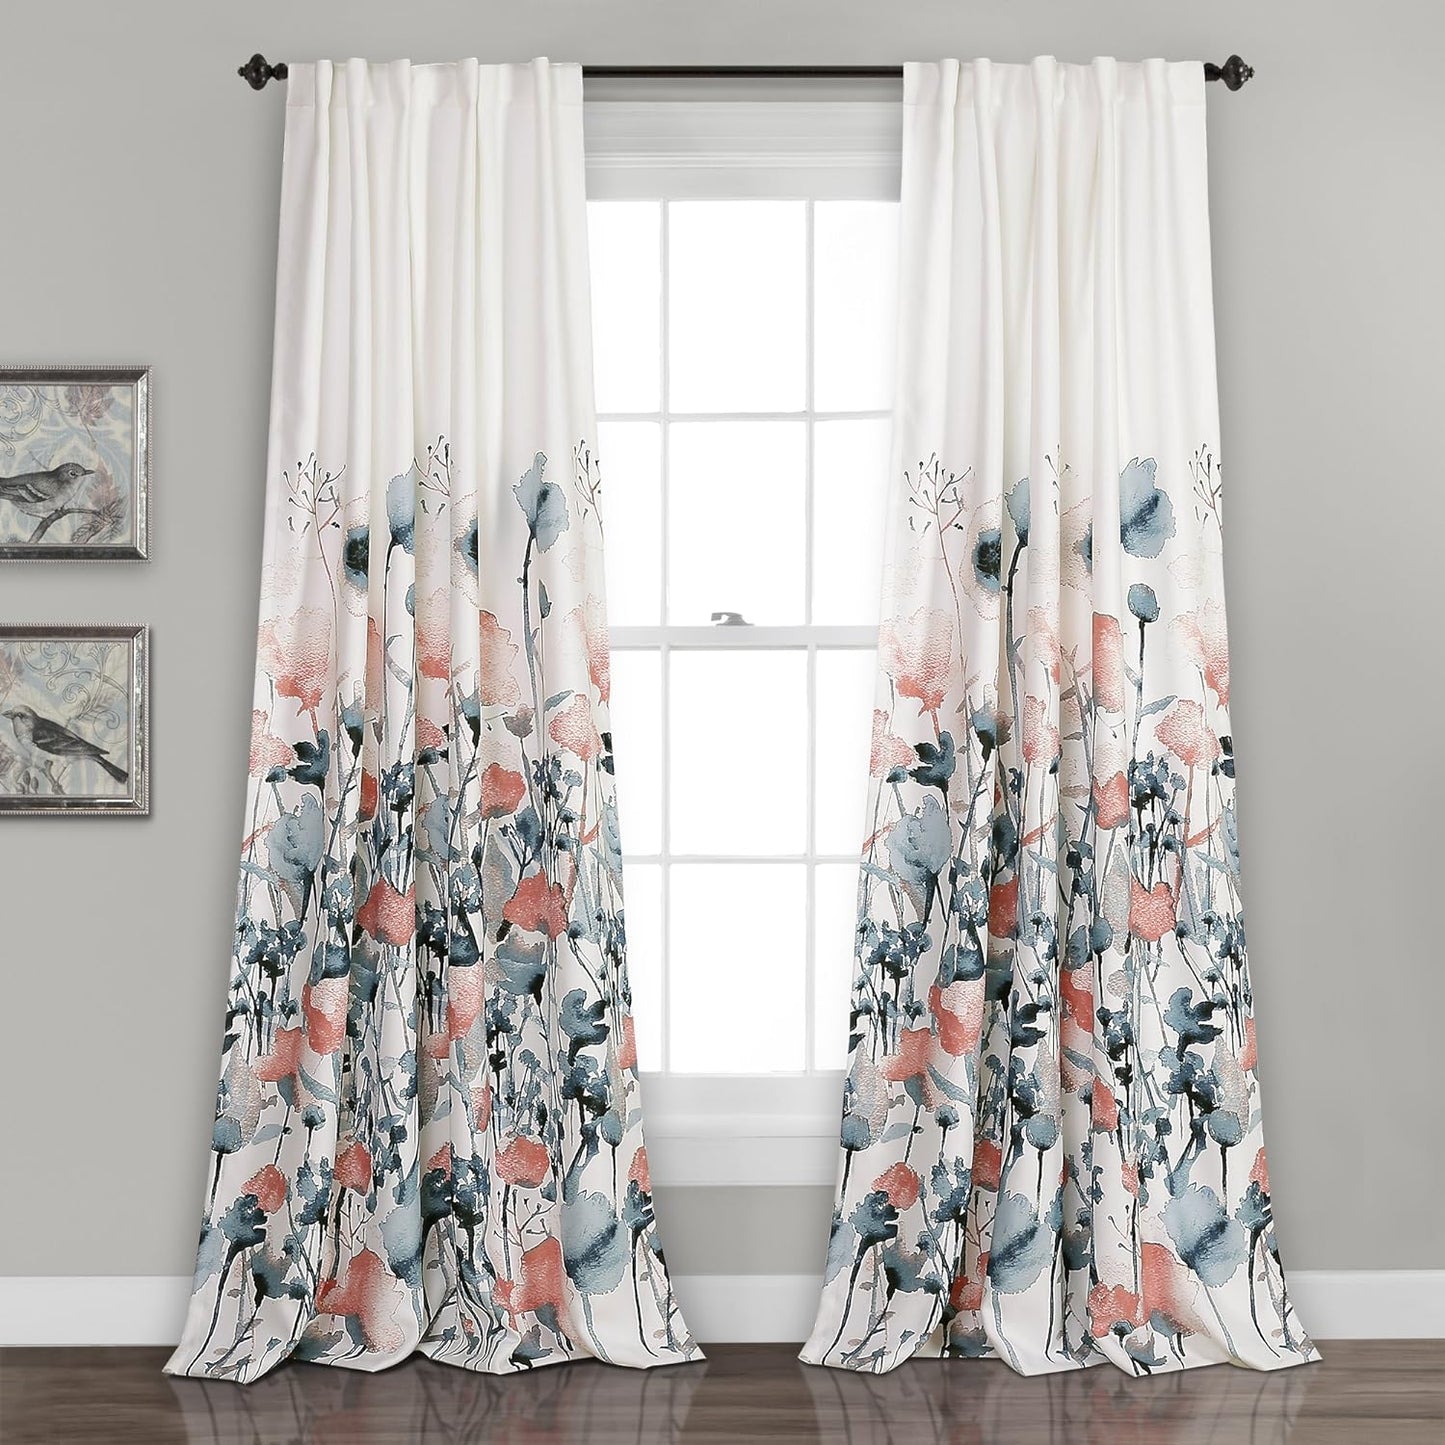 Lush DÉCOR Zuri Flora Curtains Room Darkening Window Panel Set for Living, Dining, Bedroom (Pair), 84 X 52 In, Blue and Coral, 2 Count